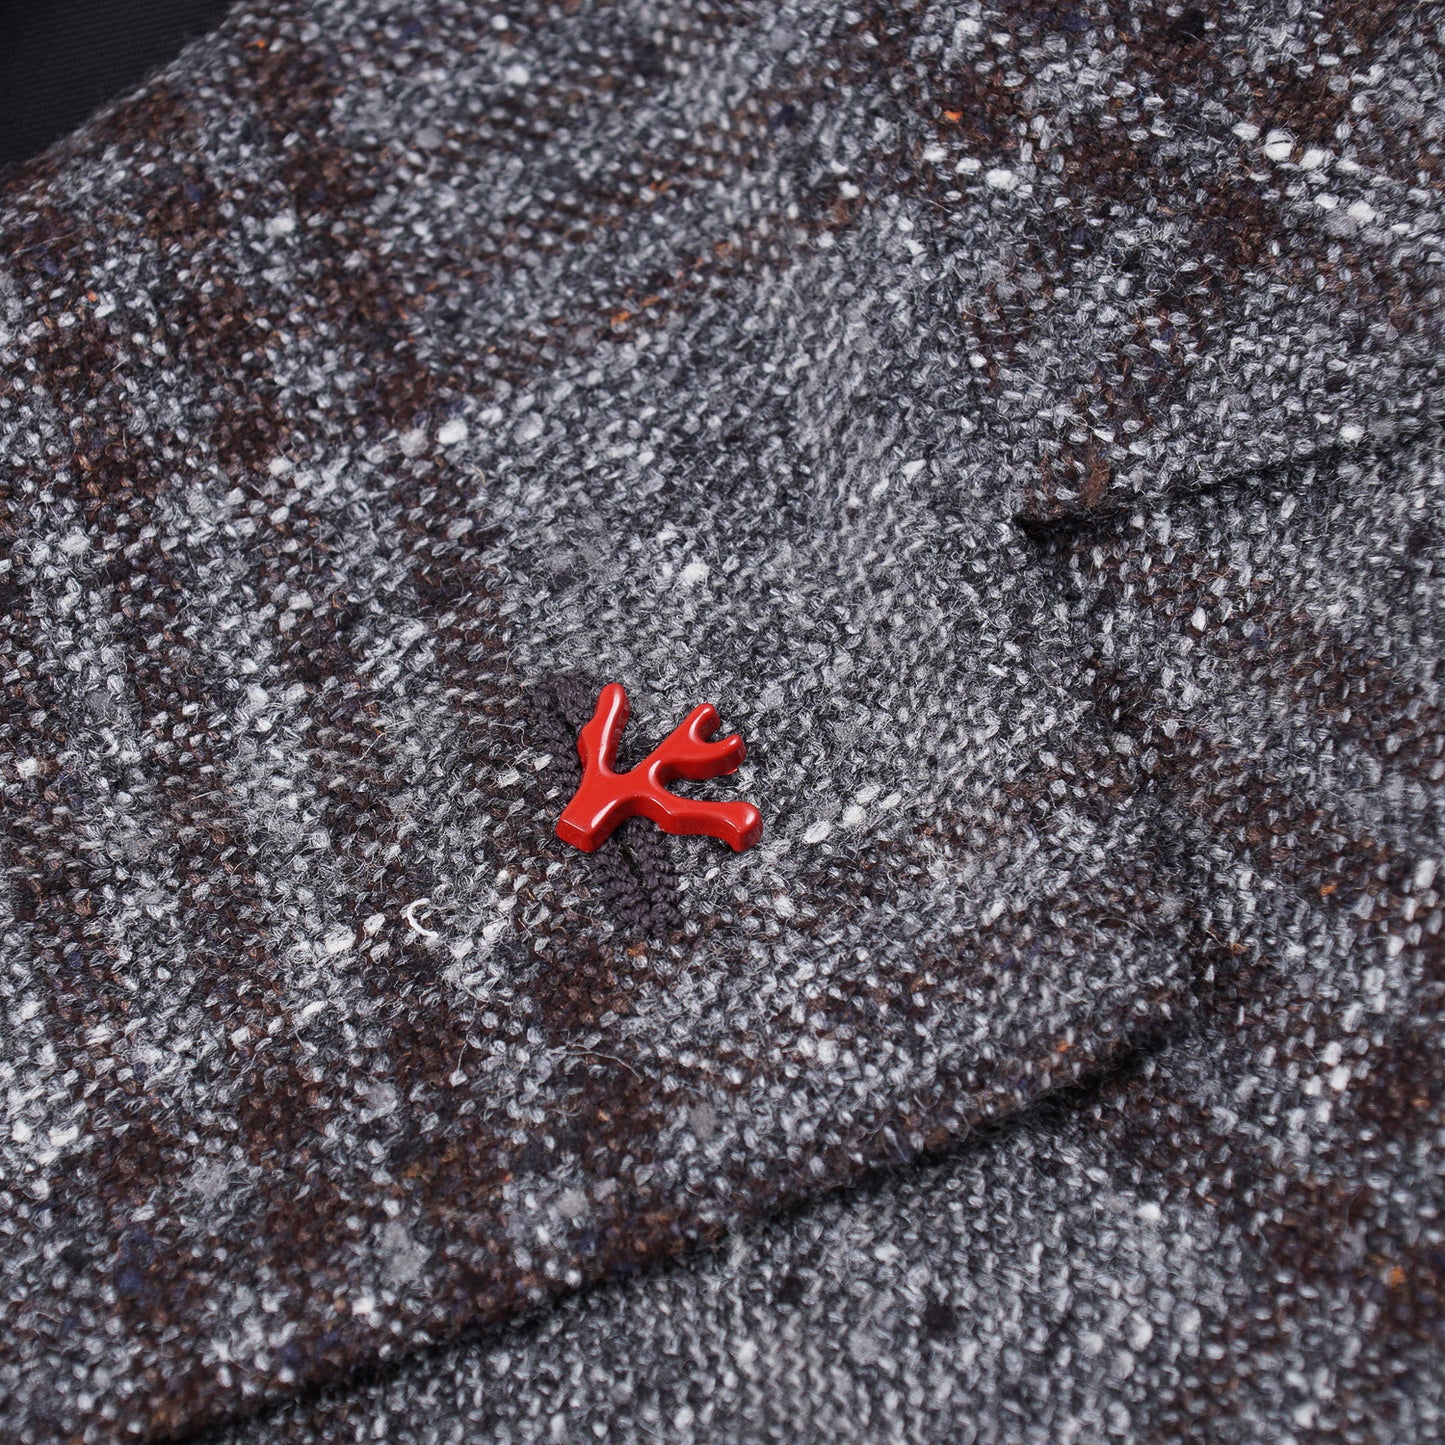 Isaia Silk Wool and Cashmere Sport Coat - Top Shelf Apparel